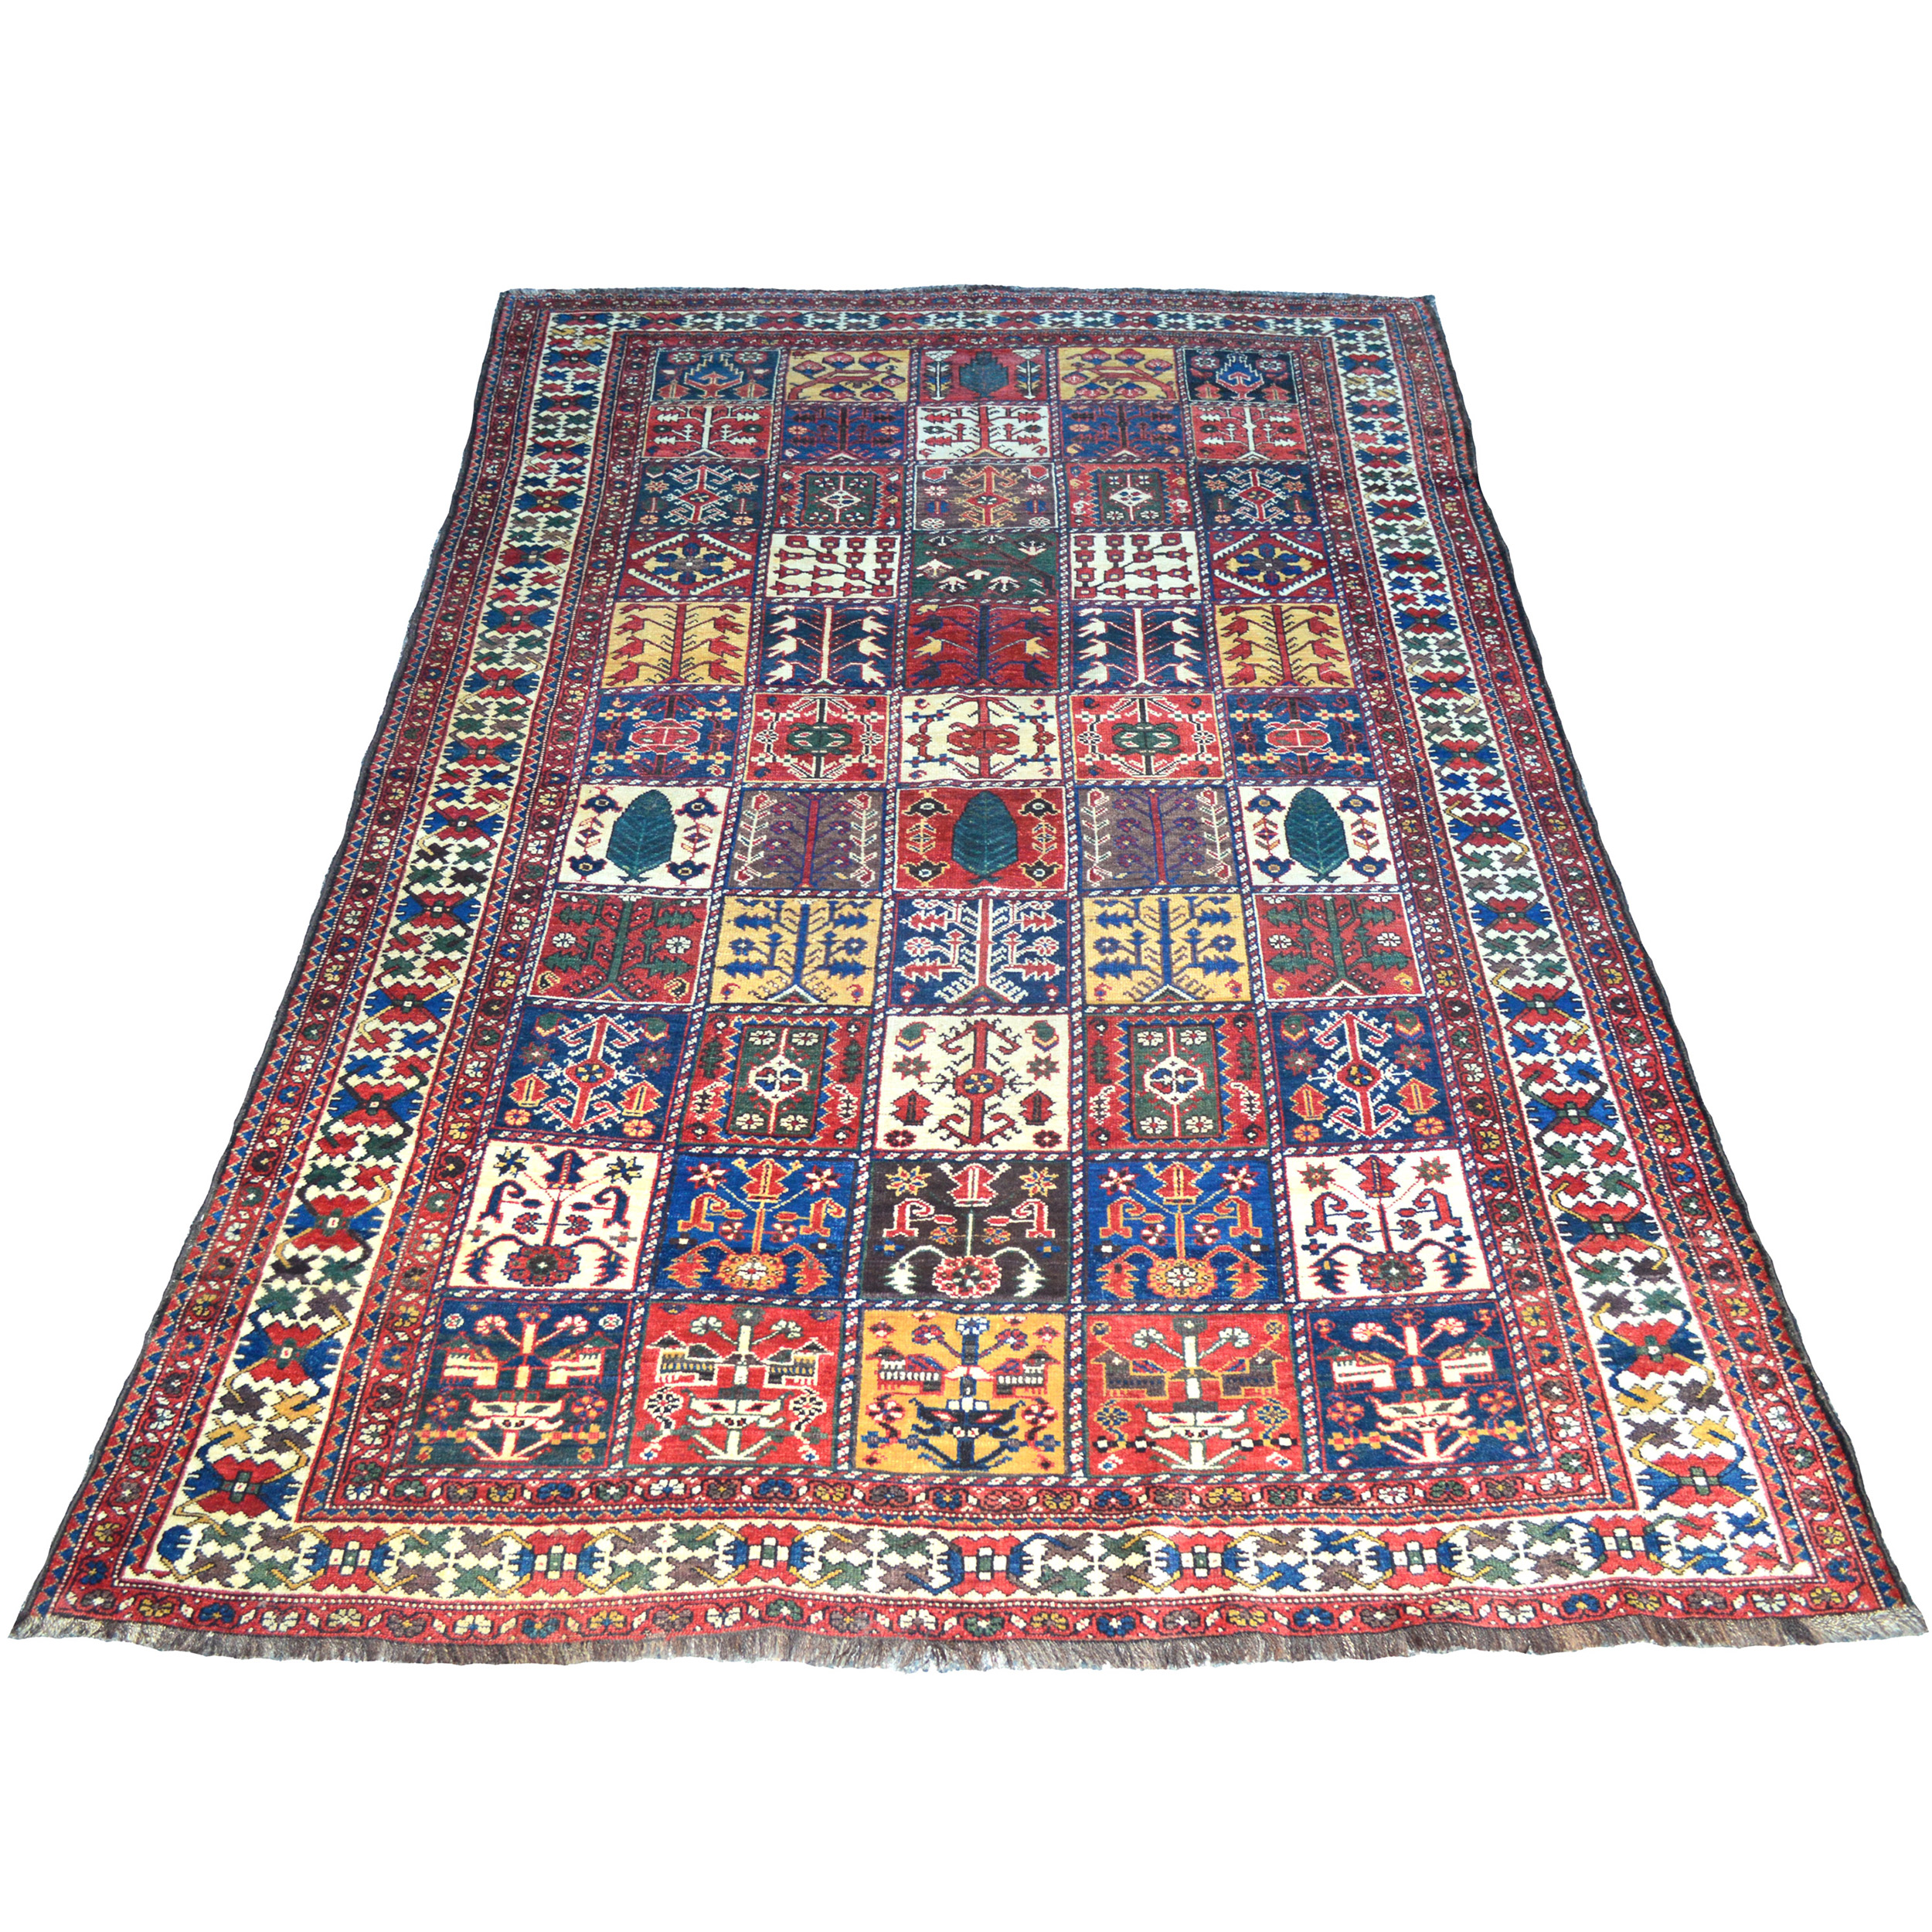 Boston area antique rug specialists Douglas Stock Gallery offer antique Persian tribal rugs including examples such as this antique Persian Bakhtiyari carpet with a Garden panel design, circa 1900, antique Oriental rugs Natick / Wellesley,MA area, antique rugs New England